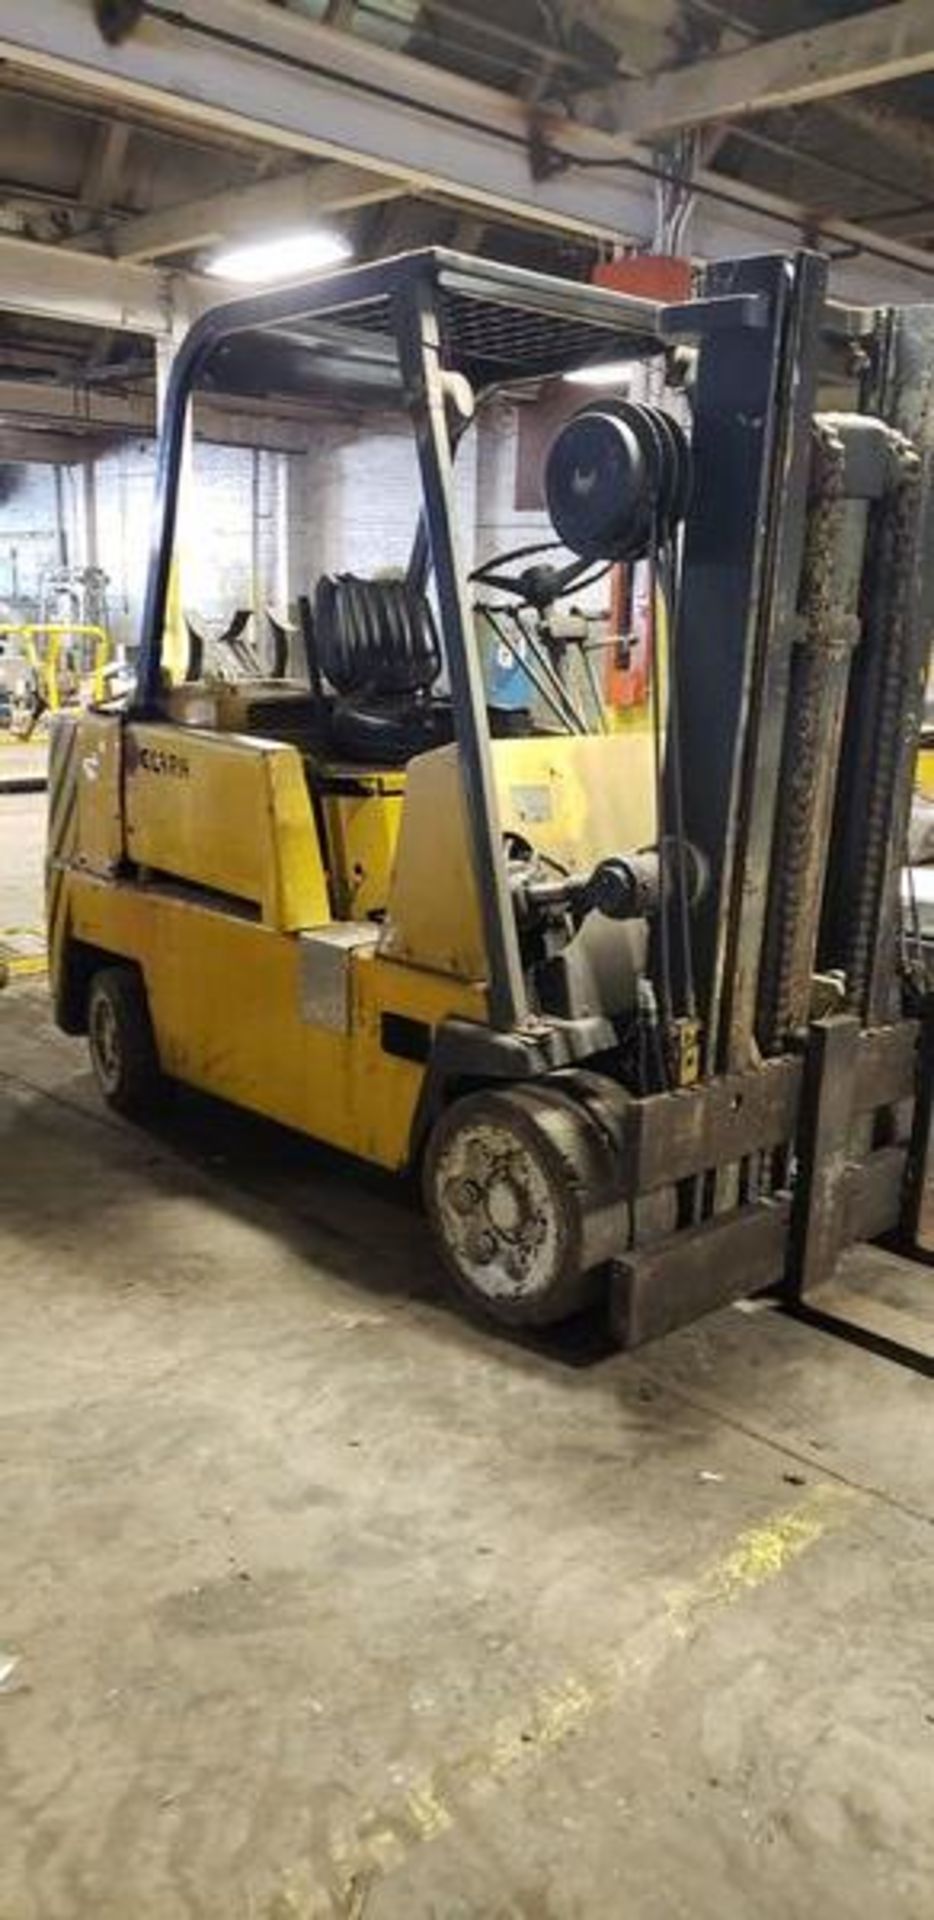 CLARK FORK LIFT C100 , 10,000 LB CAP - AS IS - Image 2 of 10